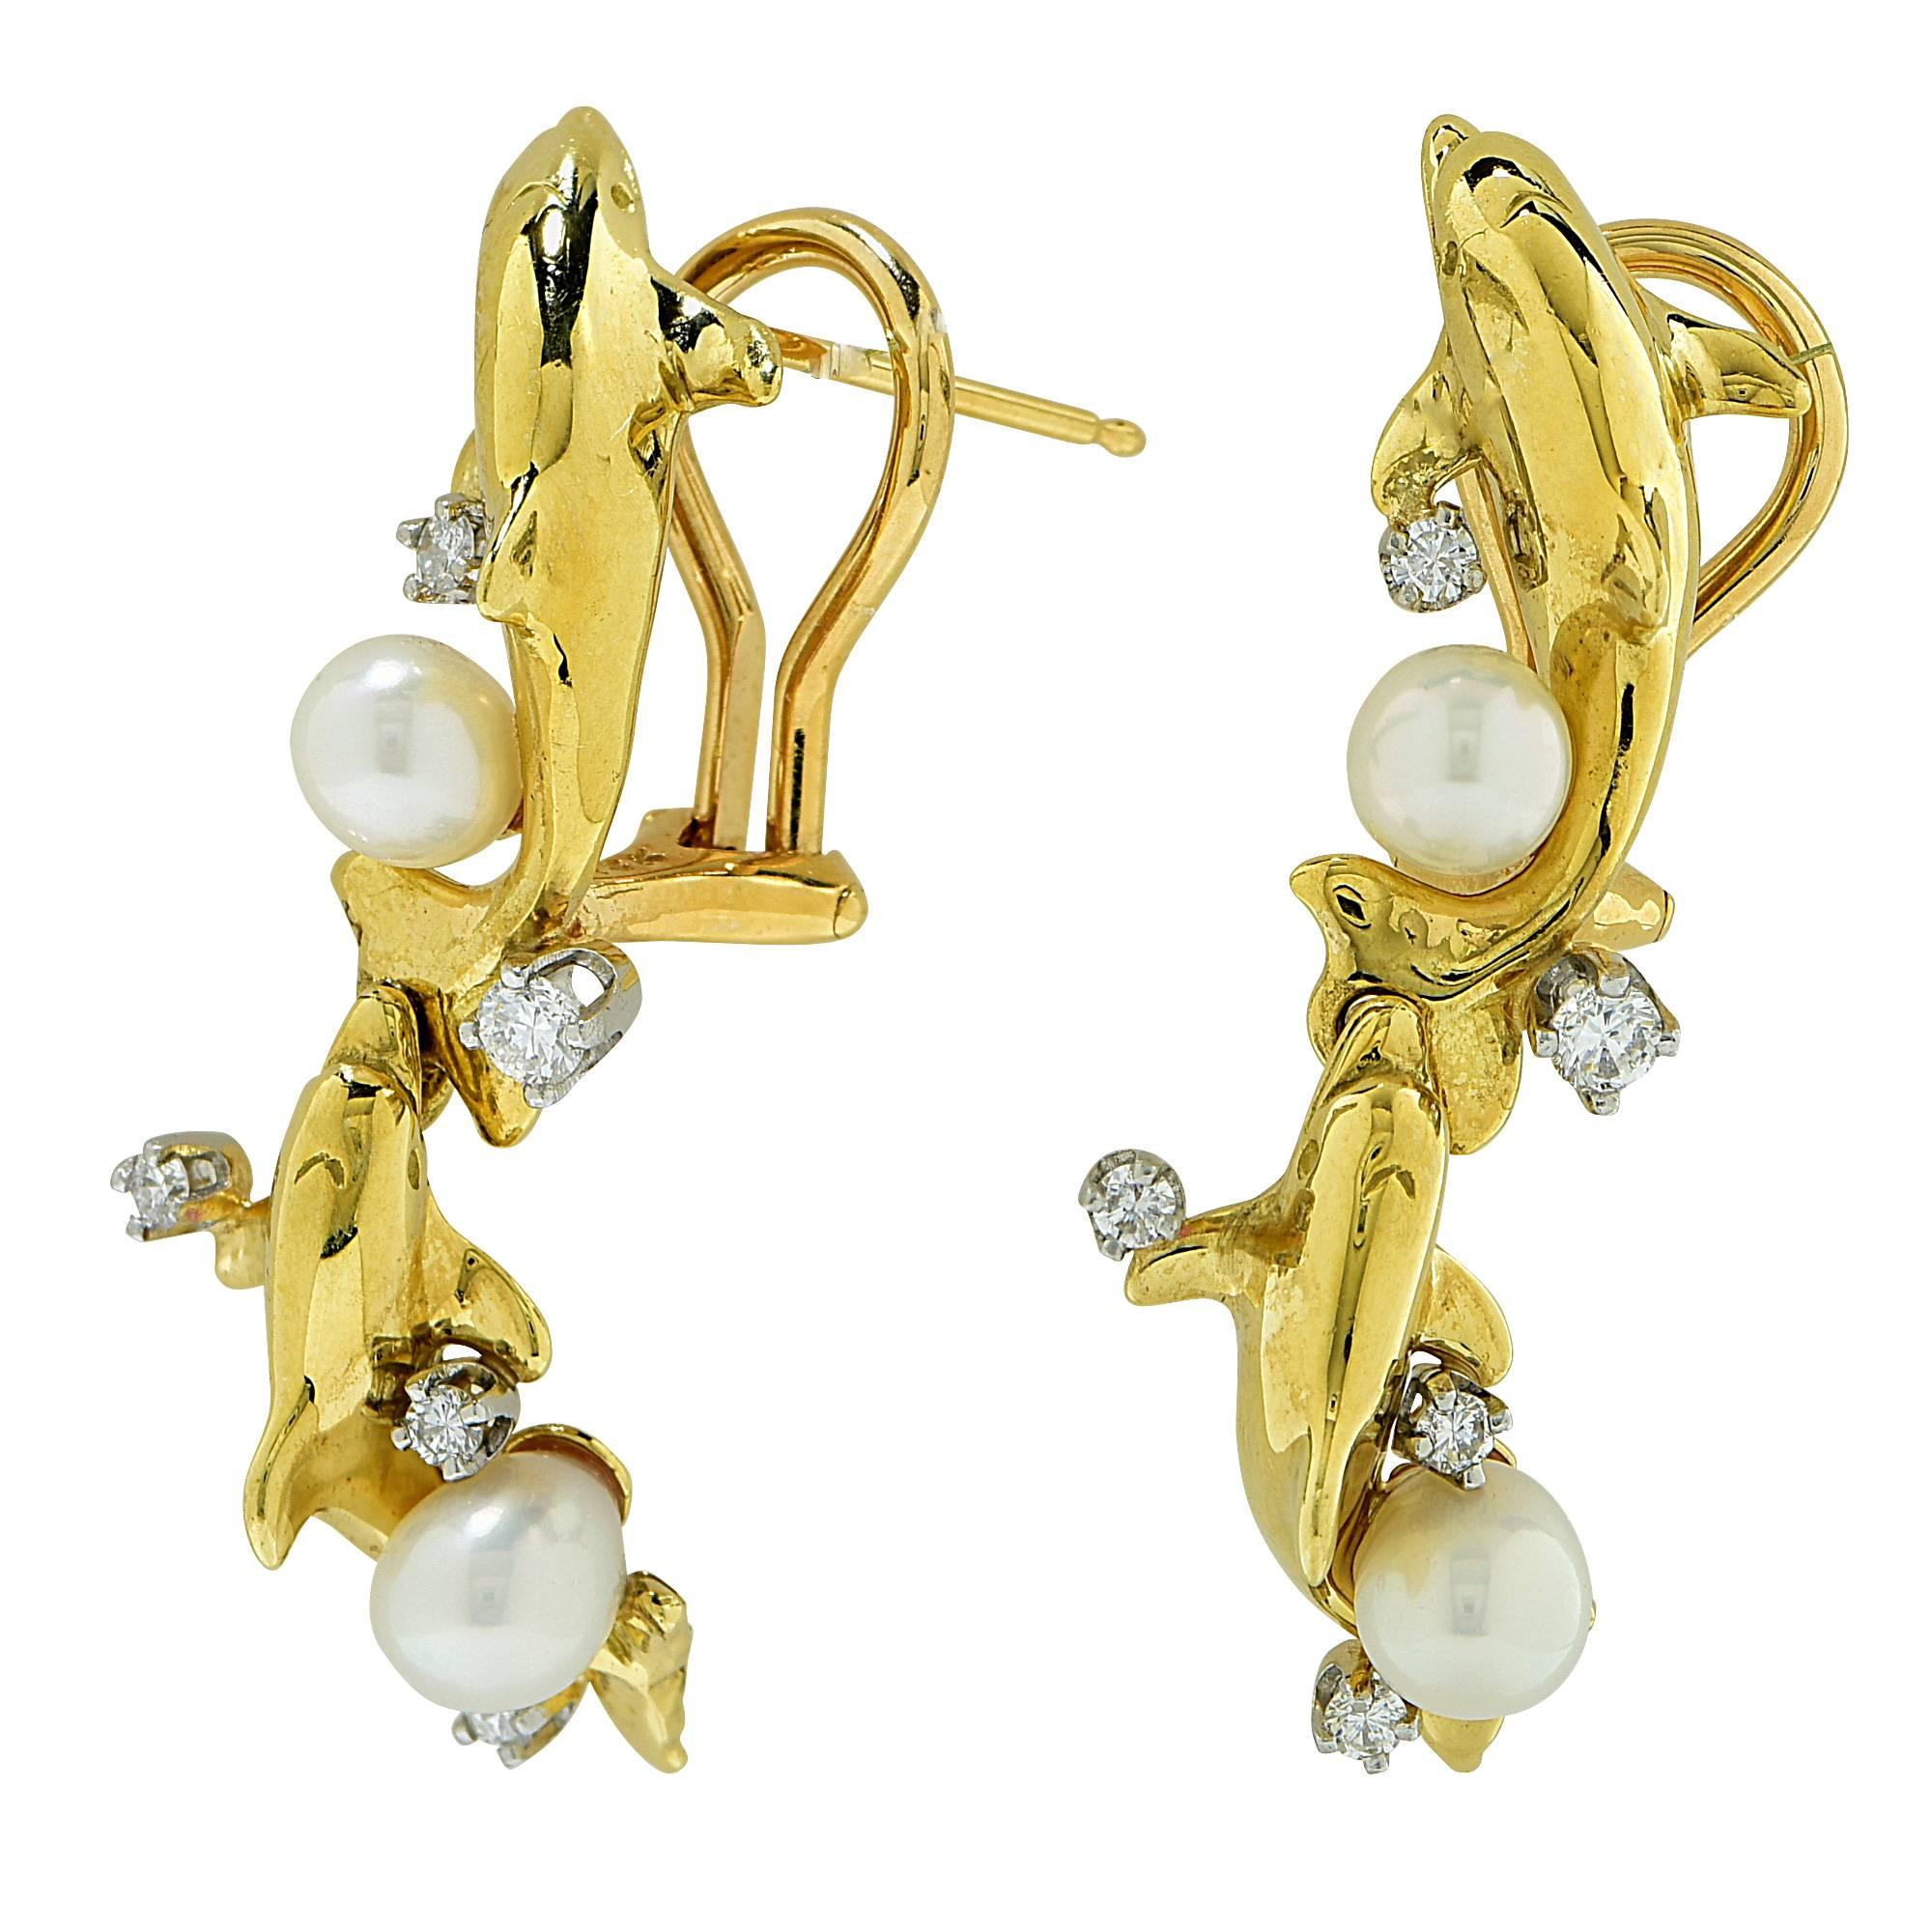 18k yellow gold limited edition Wyland double dolphin earrings number 52 of 250 featuring cultured pearls 5.40m accented by 10 round brilliant cut diamonds weighing approximately .26cts total G color VS clarity.

The earrings measure 1.33 inches